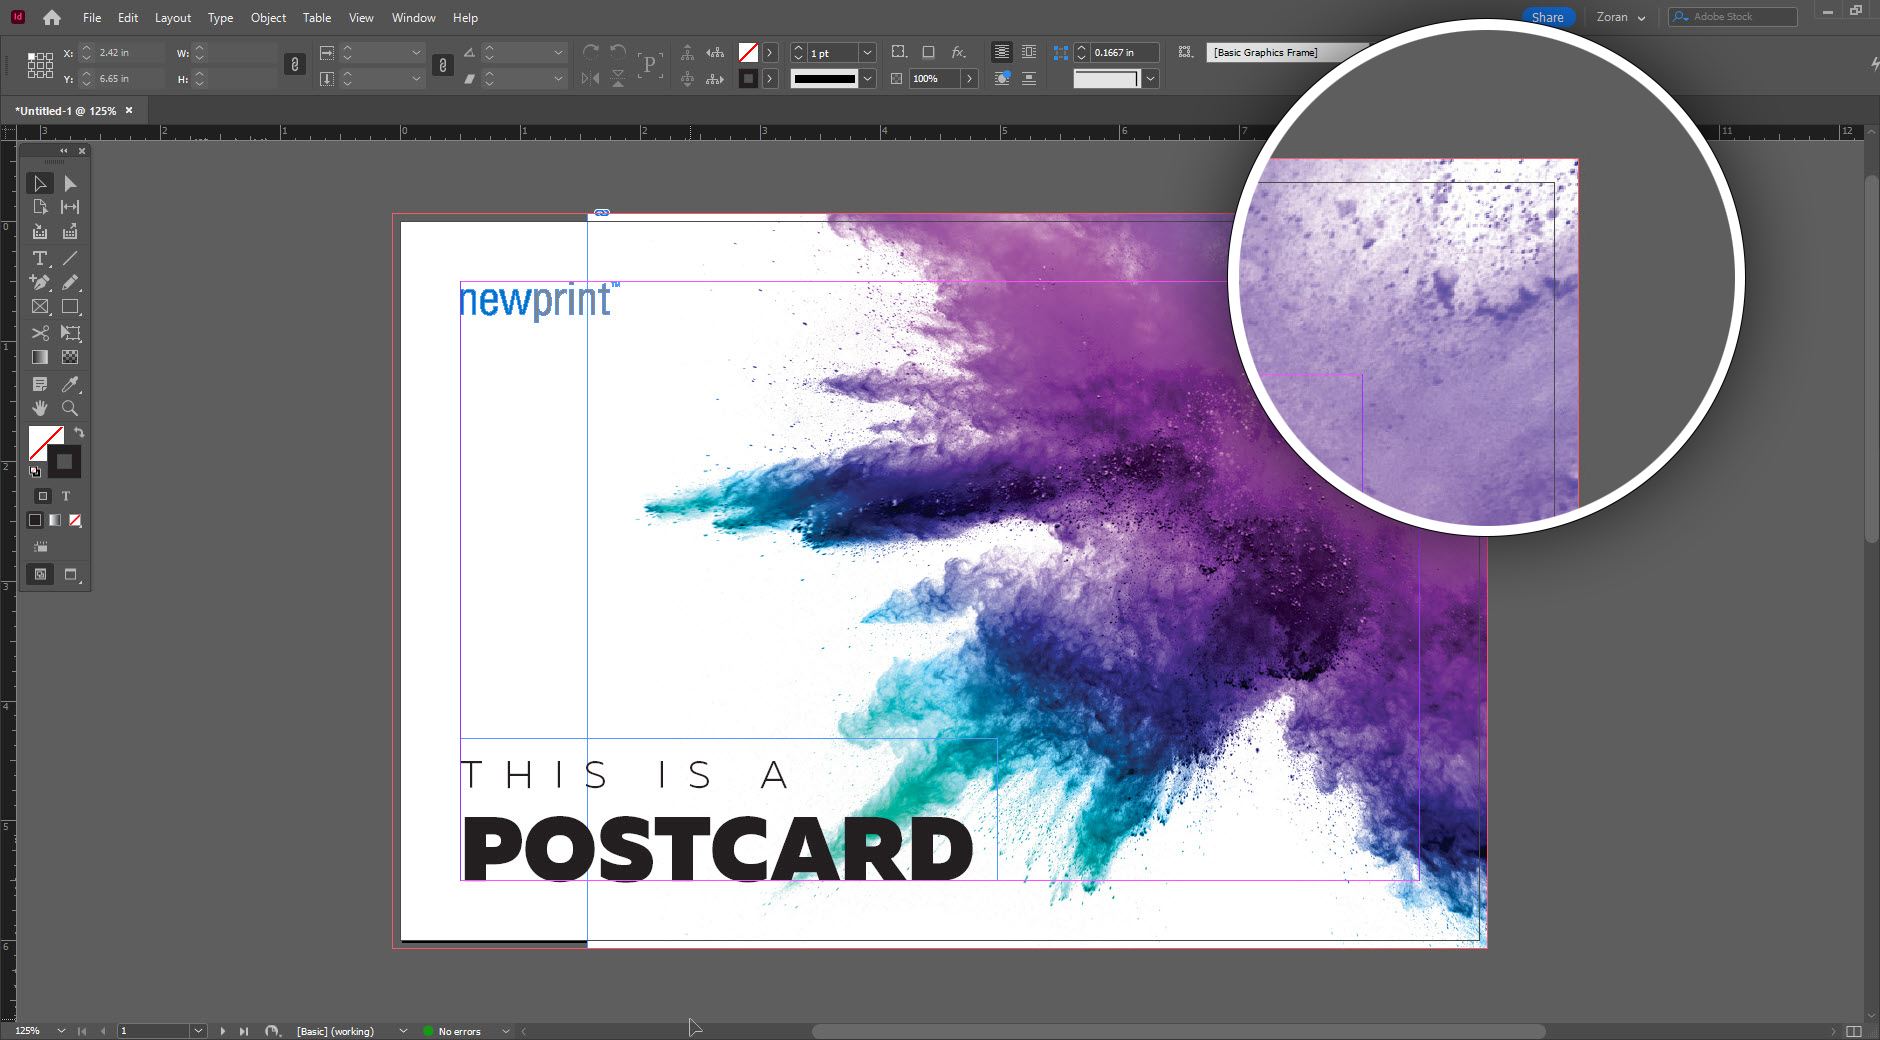 Screenshot of Adobe Indesign workspace showing a postcard design and indicating how to correctly set up a print file.